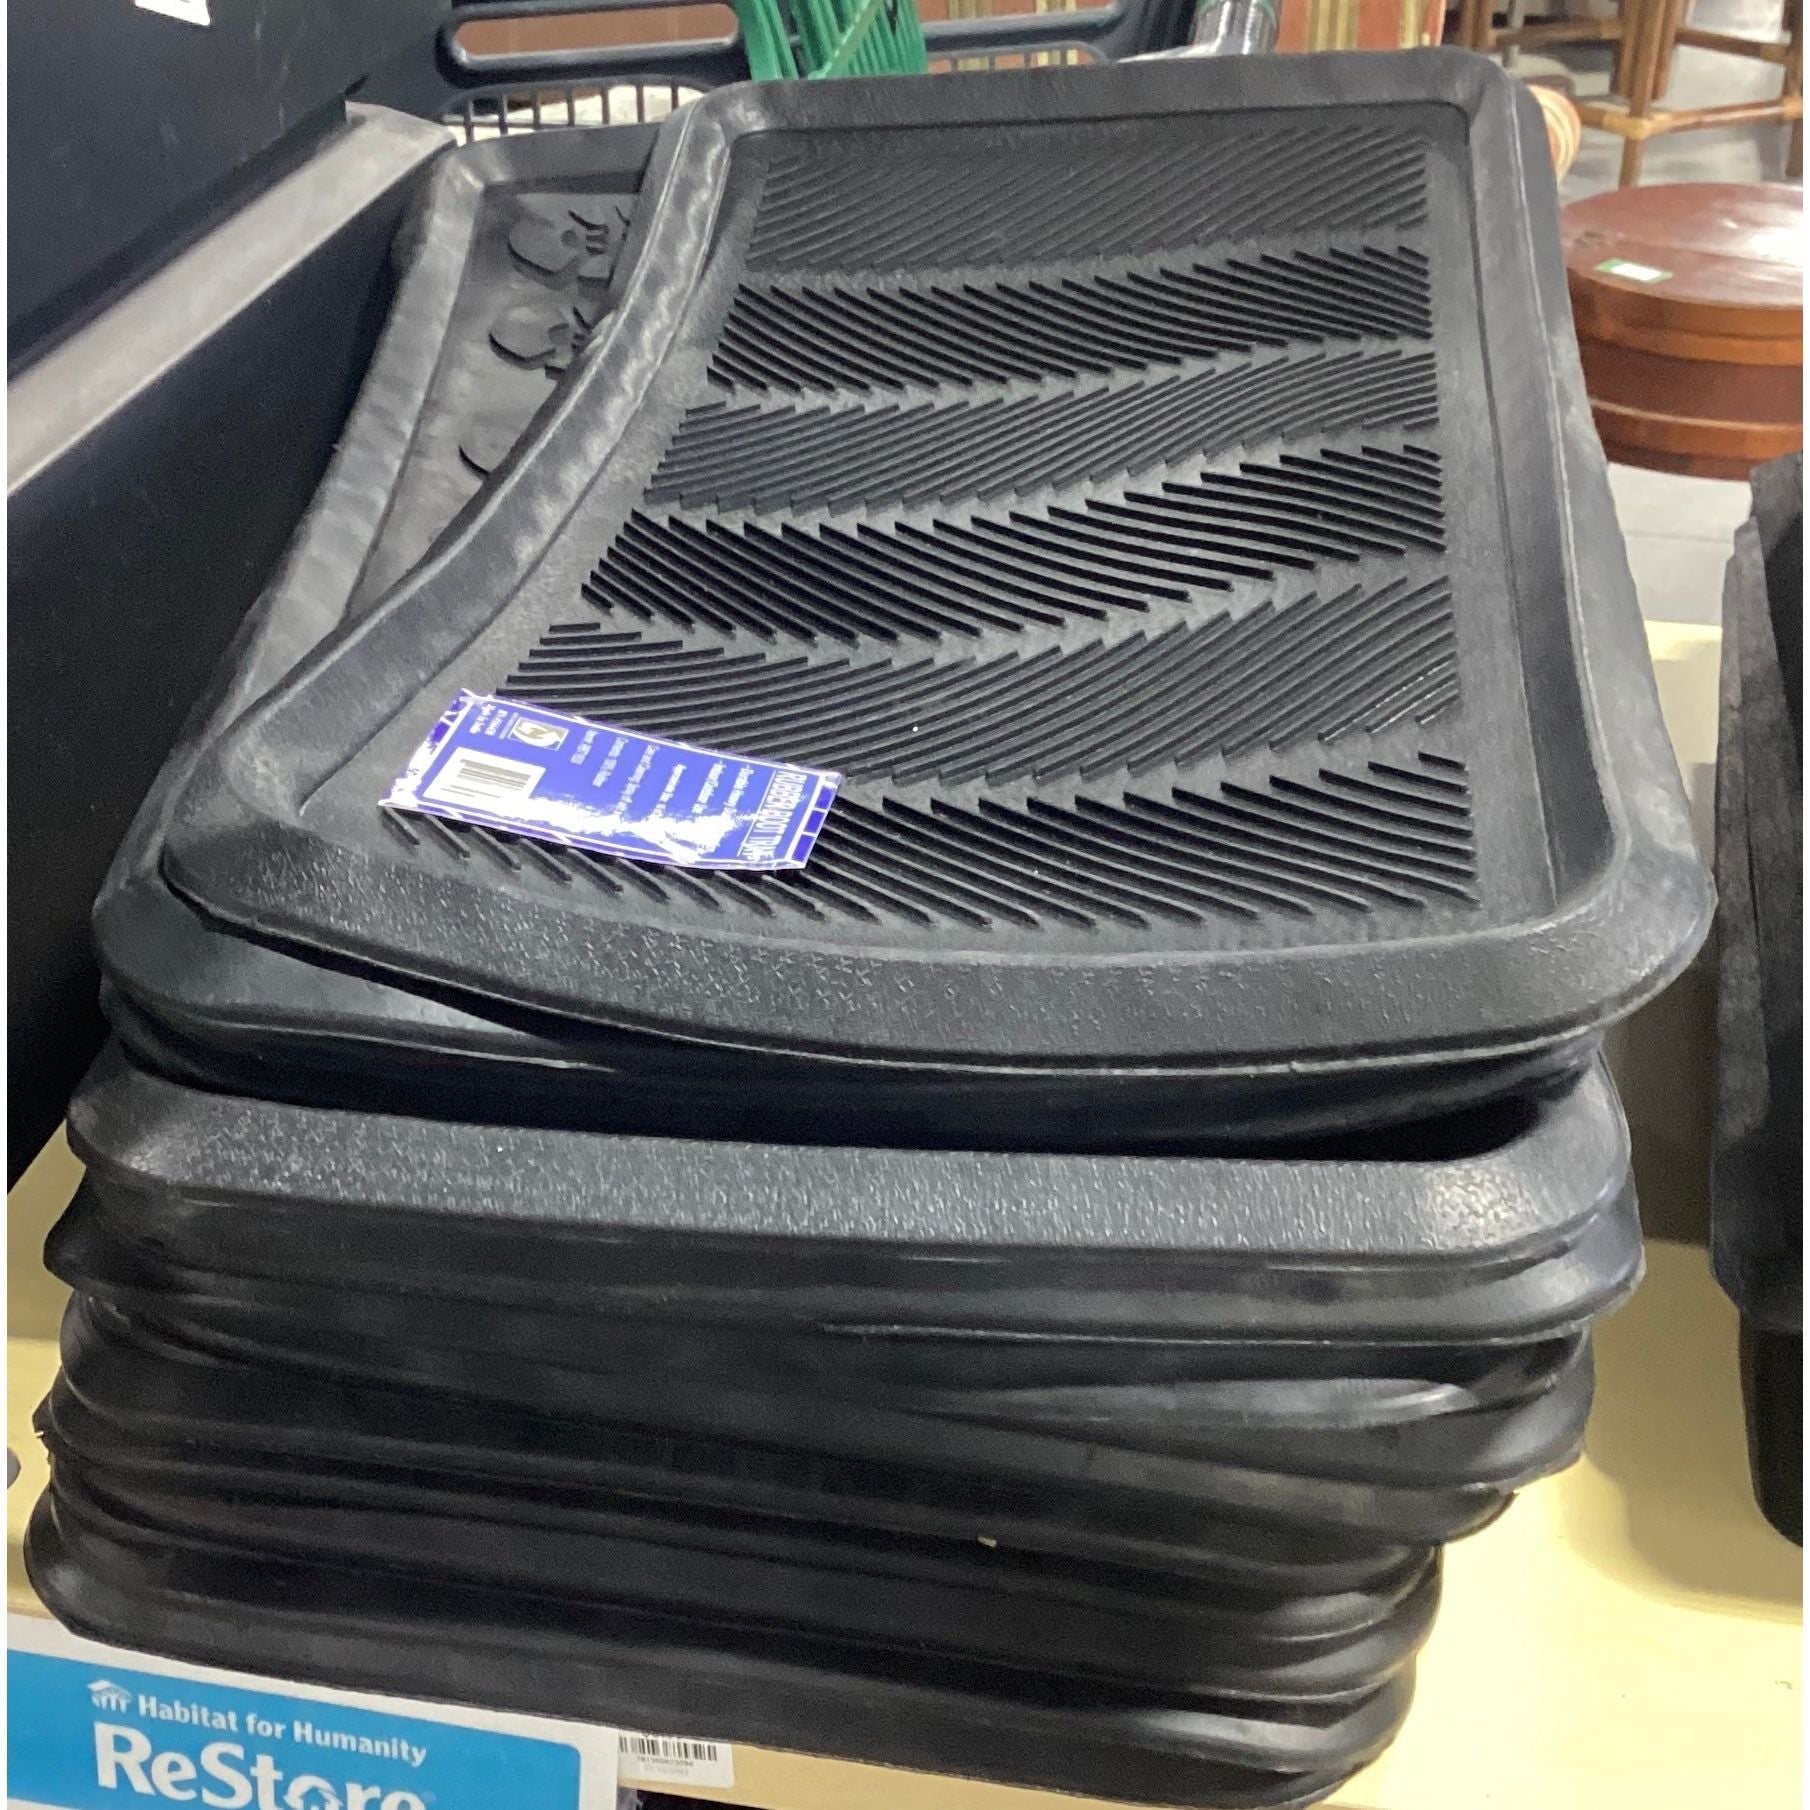 Boot trays: a rectangular tray with raised edges used to hold wet or dirty boots, preventing dirt and water from spreading indoors.